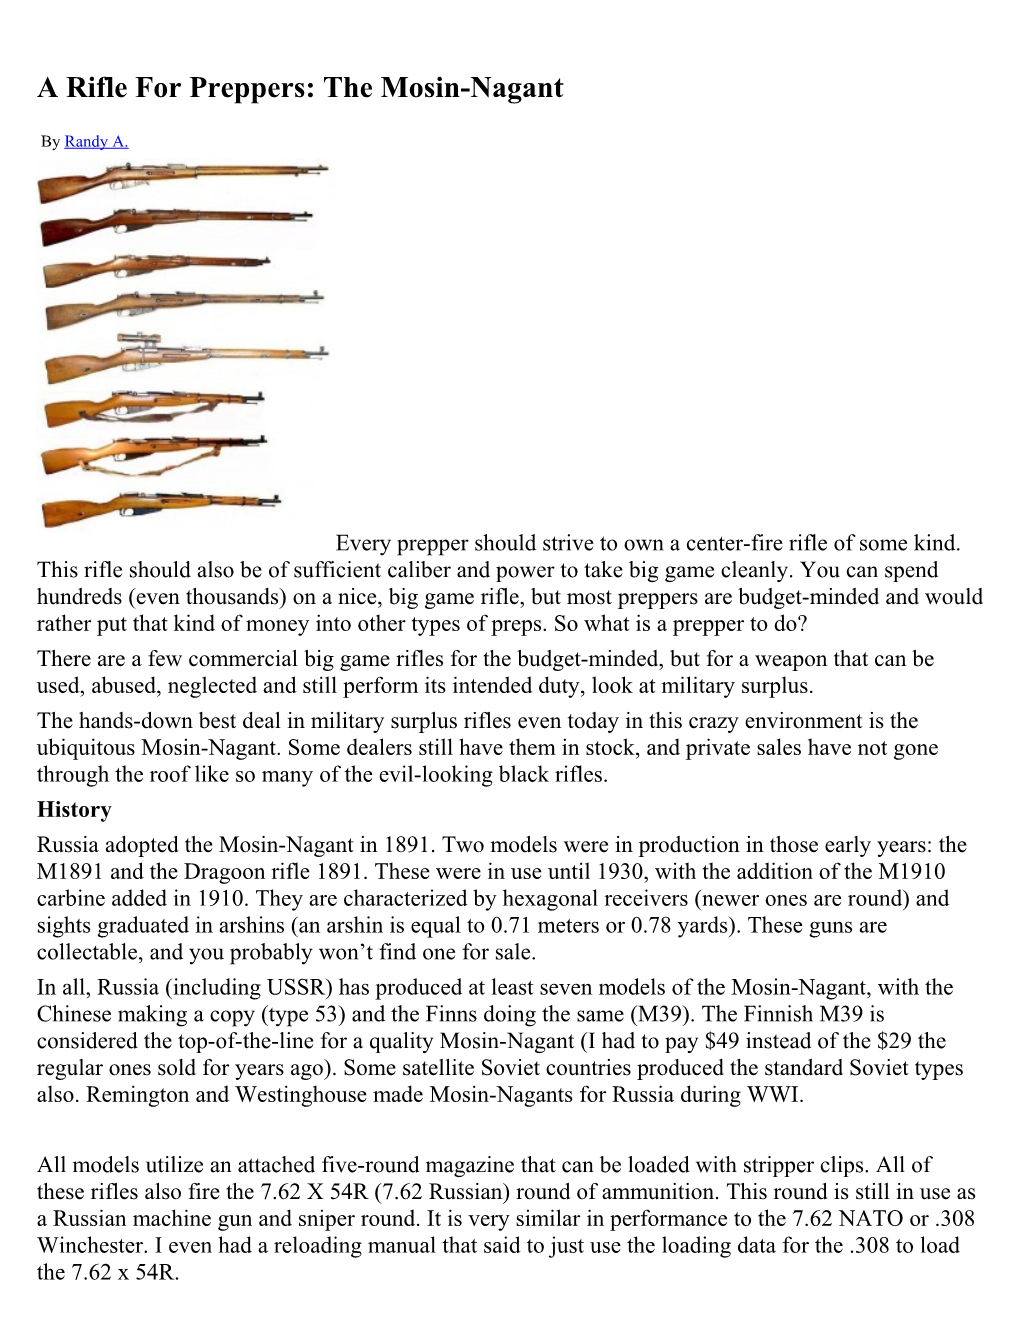 A Rifle for Preppers: the Mosin-Nagant